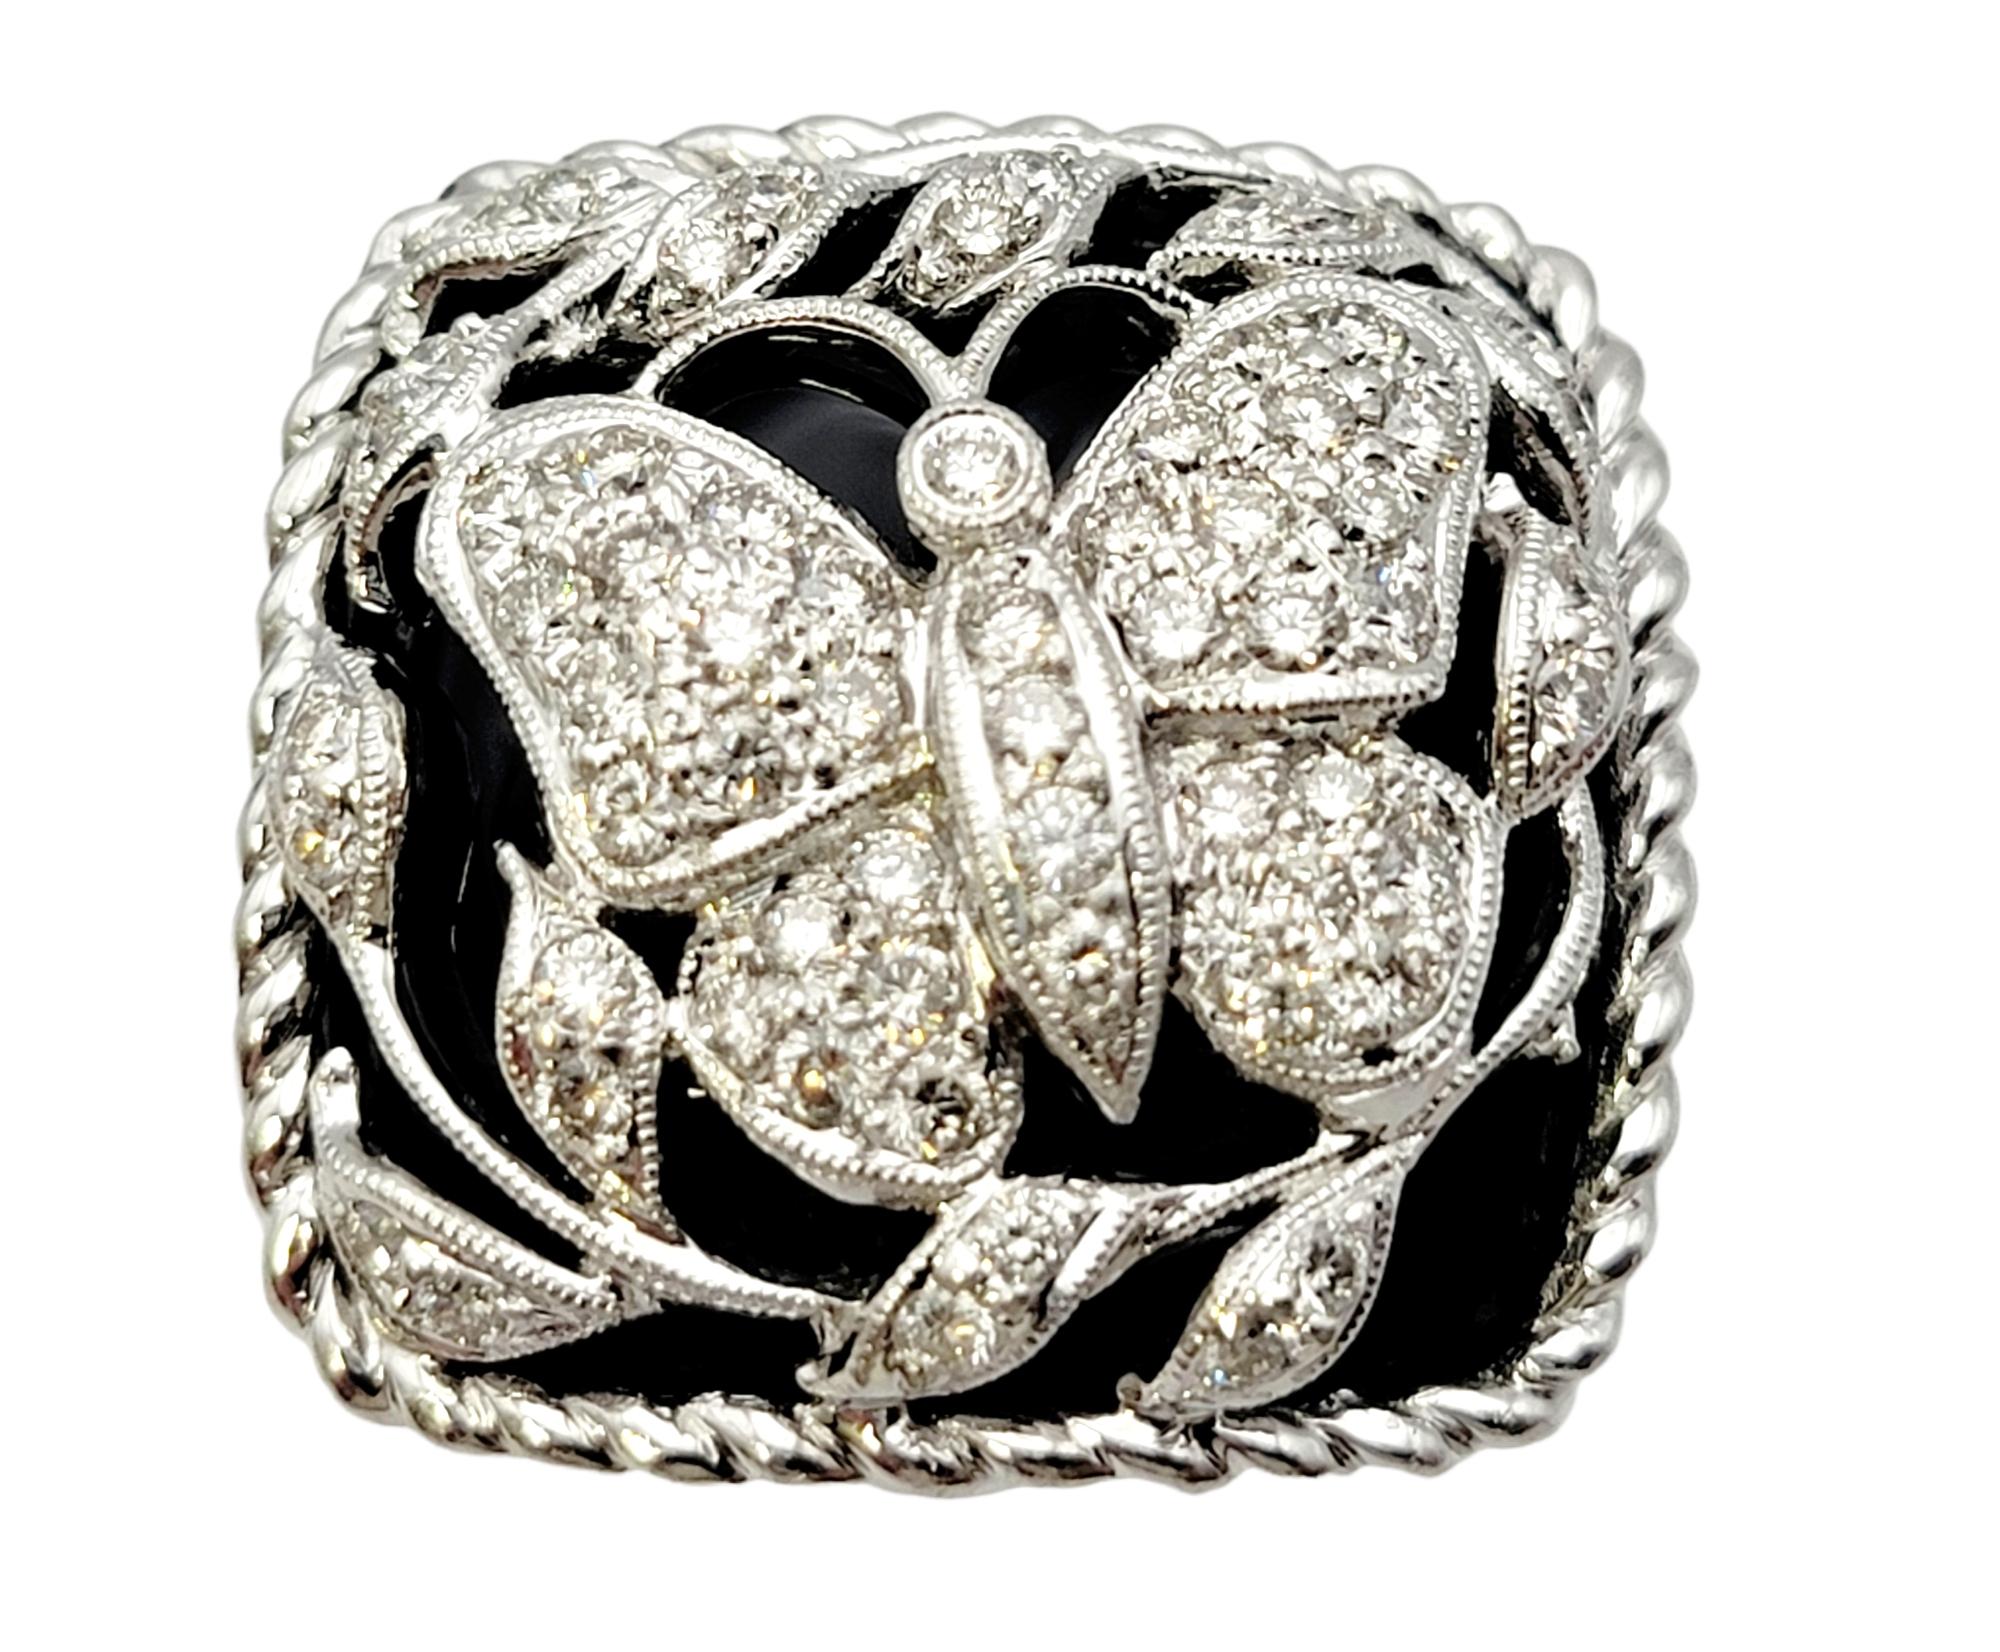 Ring size: 6.75

This bold and beautiful modern statement ring absolutely WOWS! A dazzling diamond butterfly adorns the top of the squared onyx piece, surrounded by pave diamond leaves and intricate milgrain detailing. The diamonds really pop